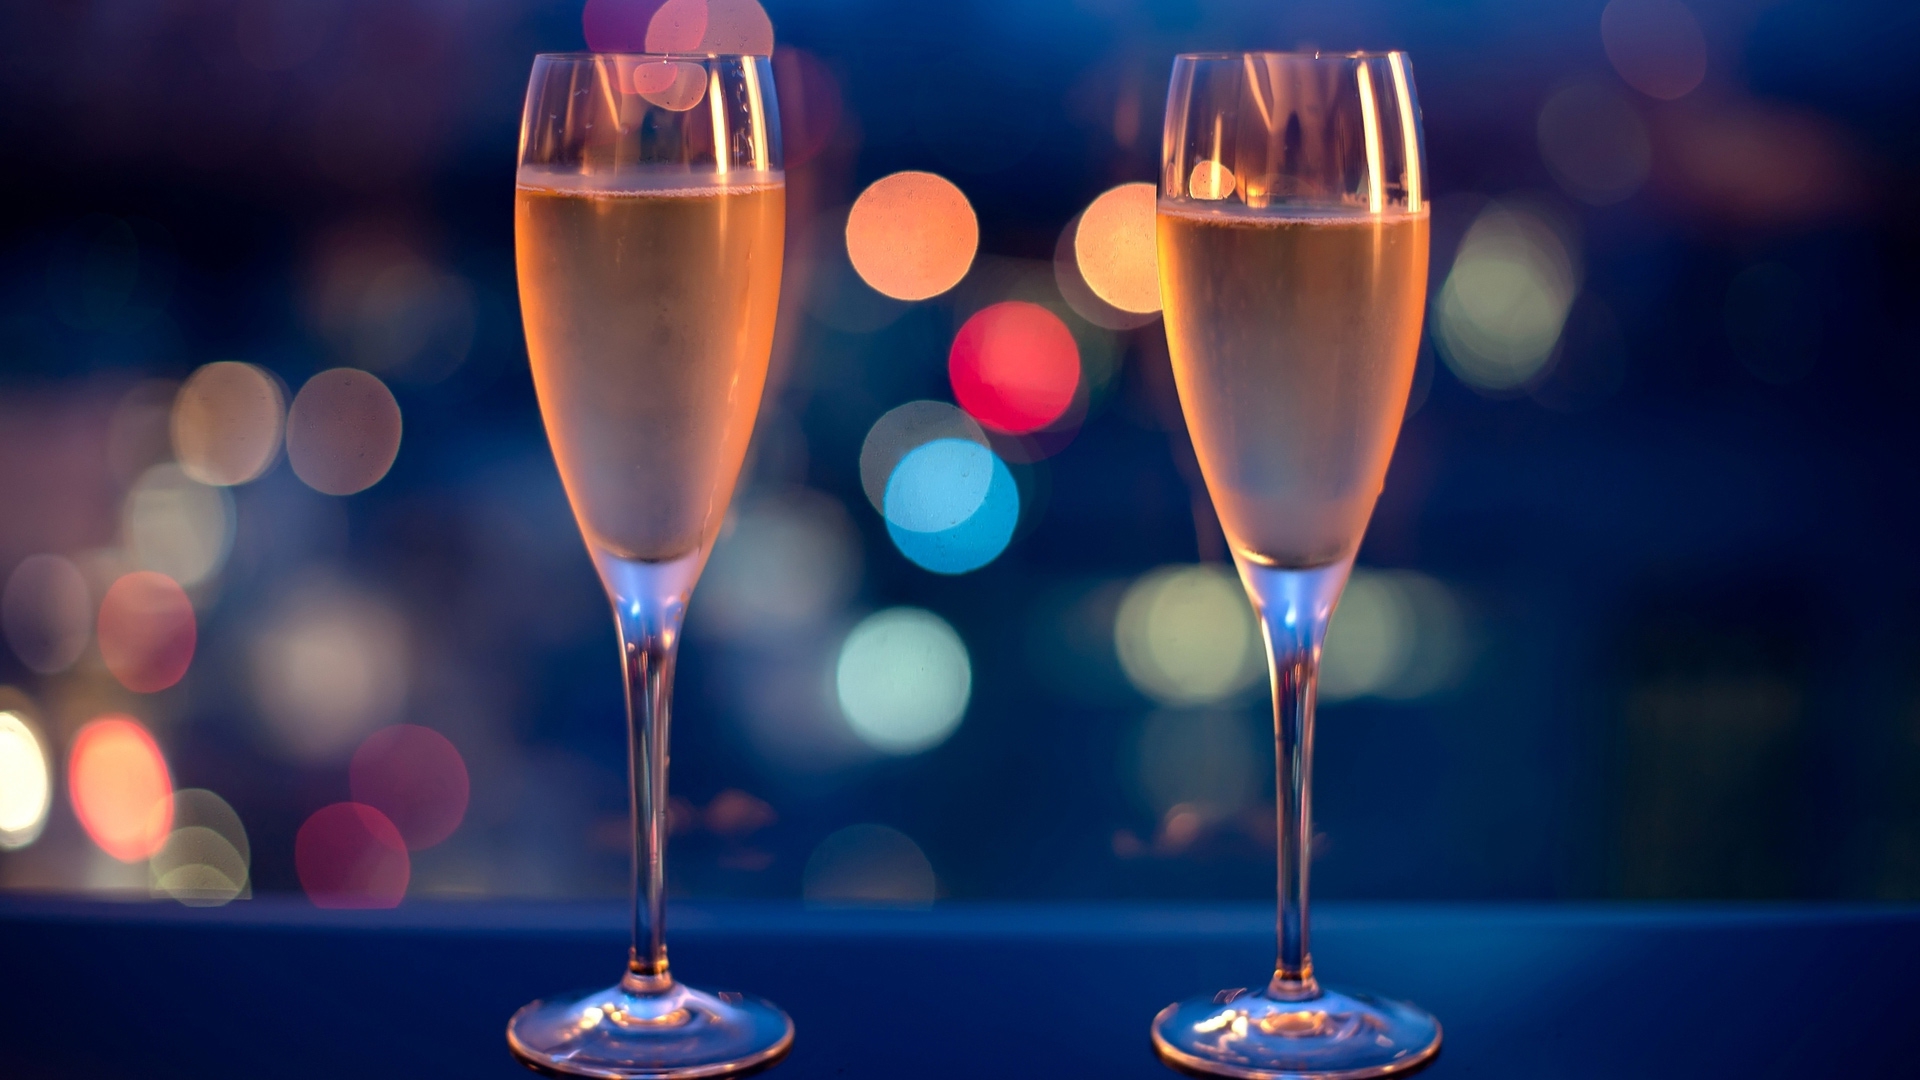 Wallpapers romanticism two glasses champagne on the desktop